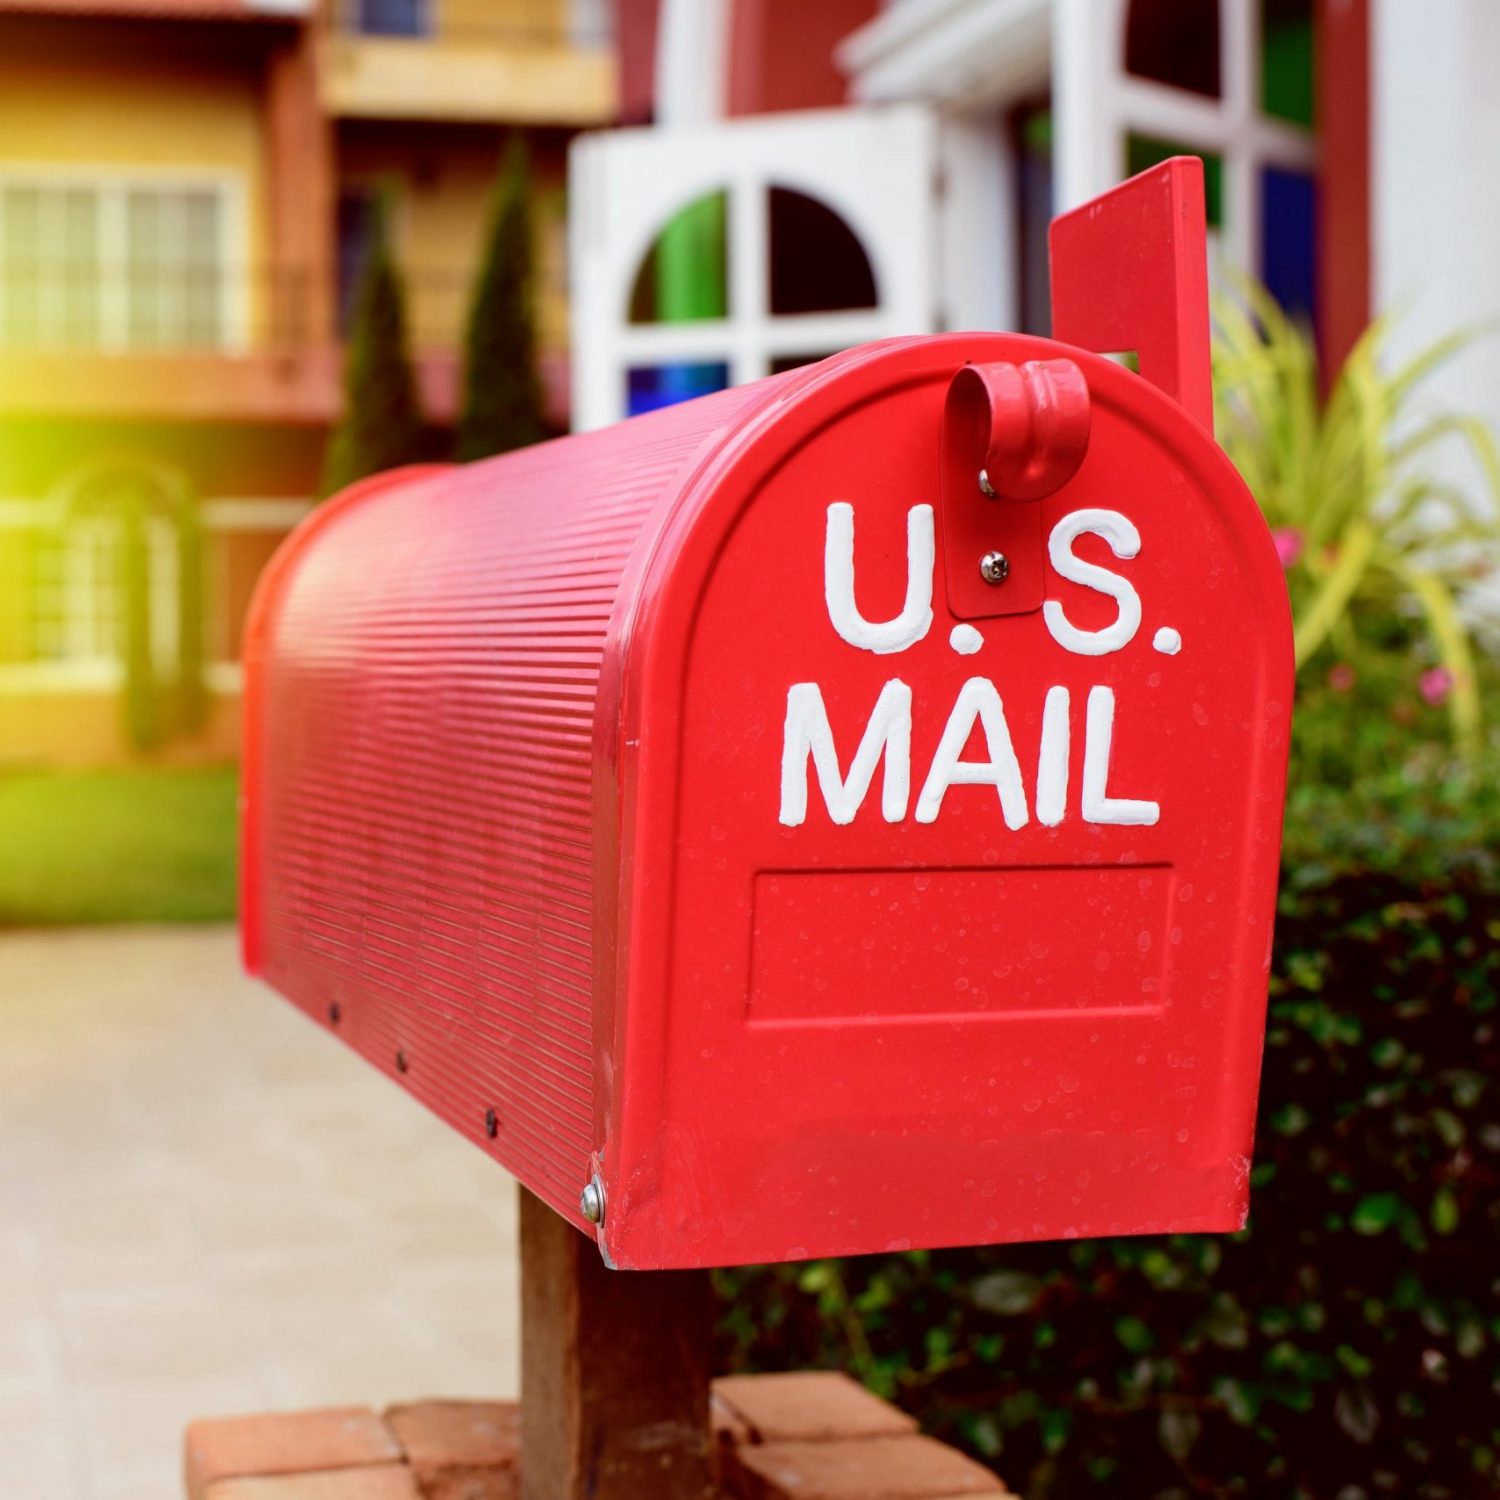 red mailbox labeled U.S. mail to represent direct mail